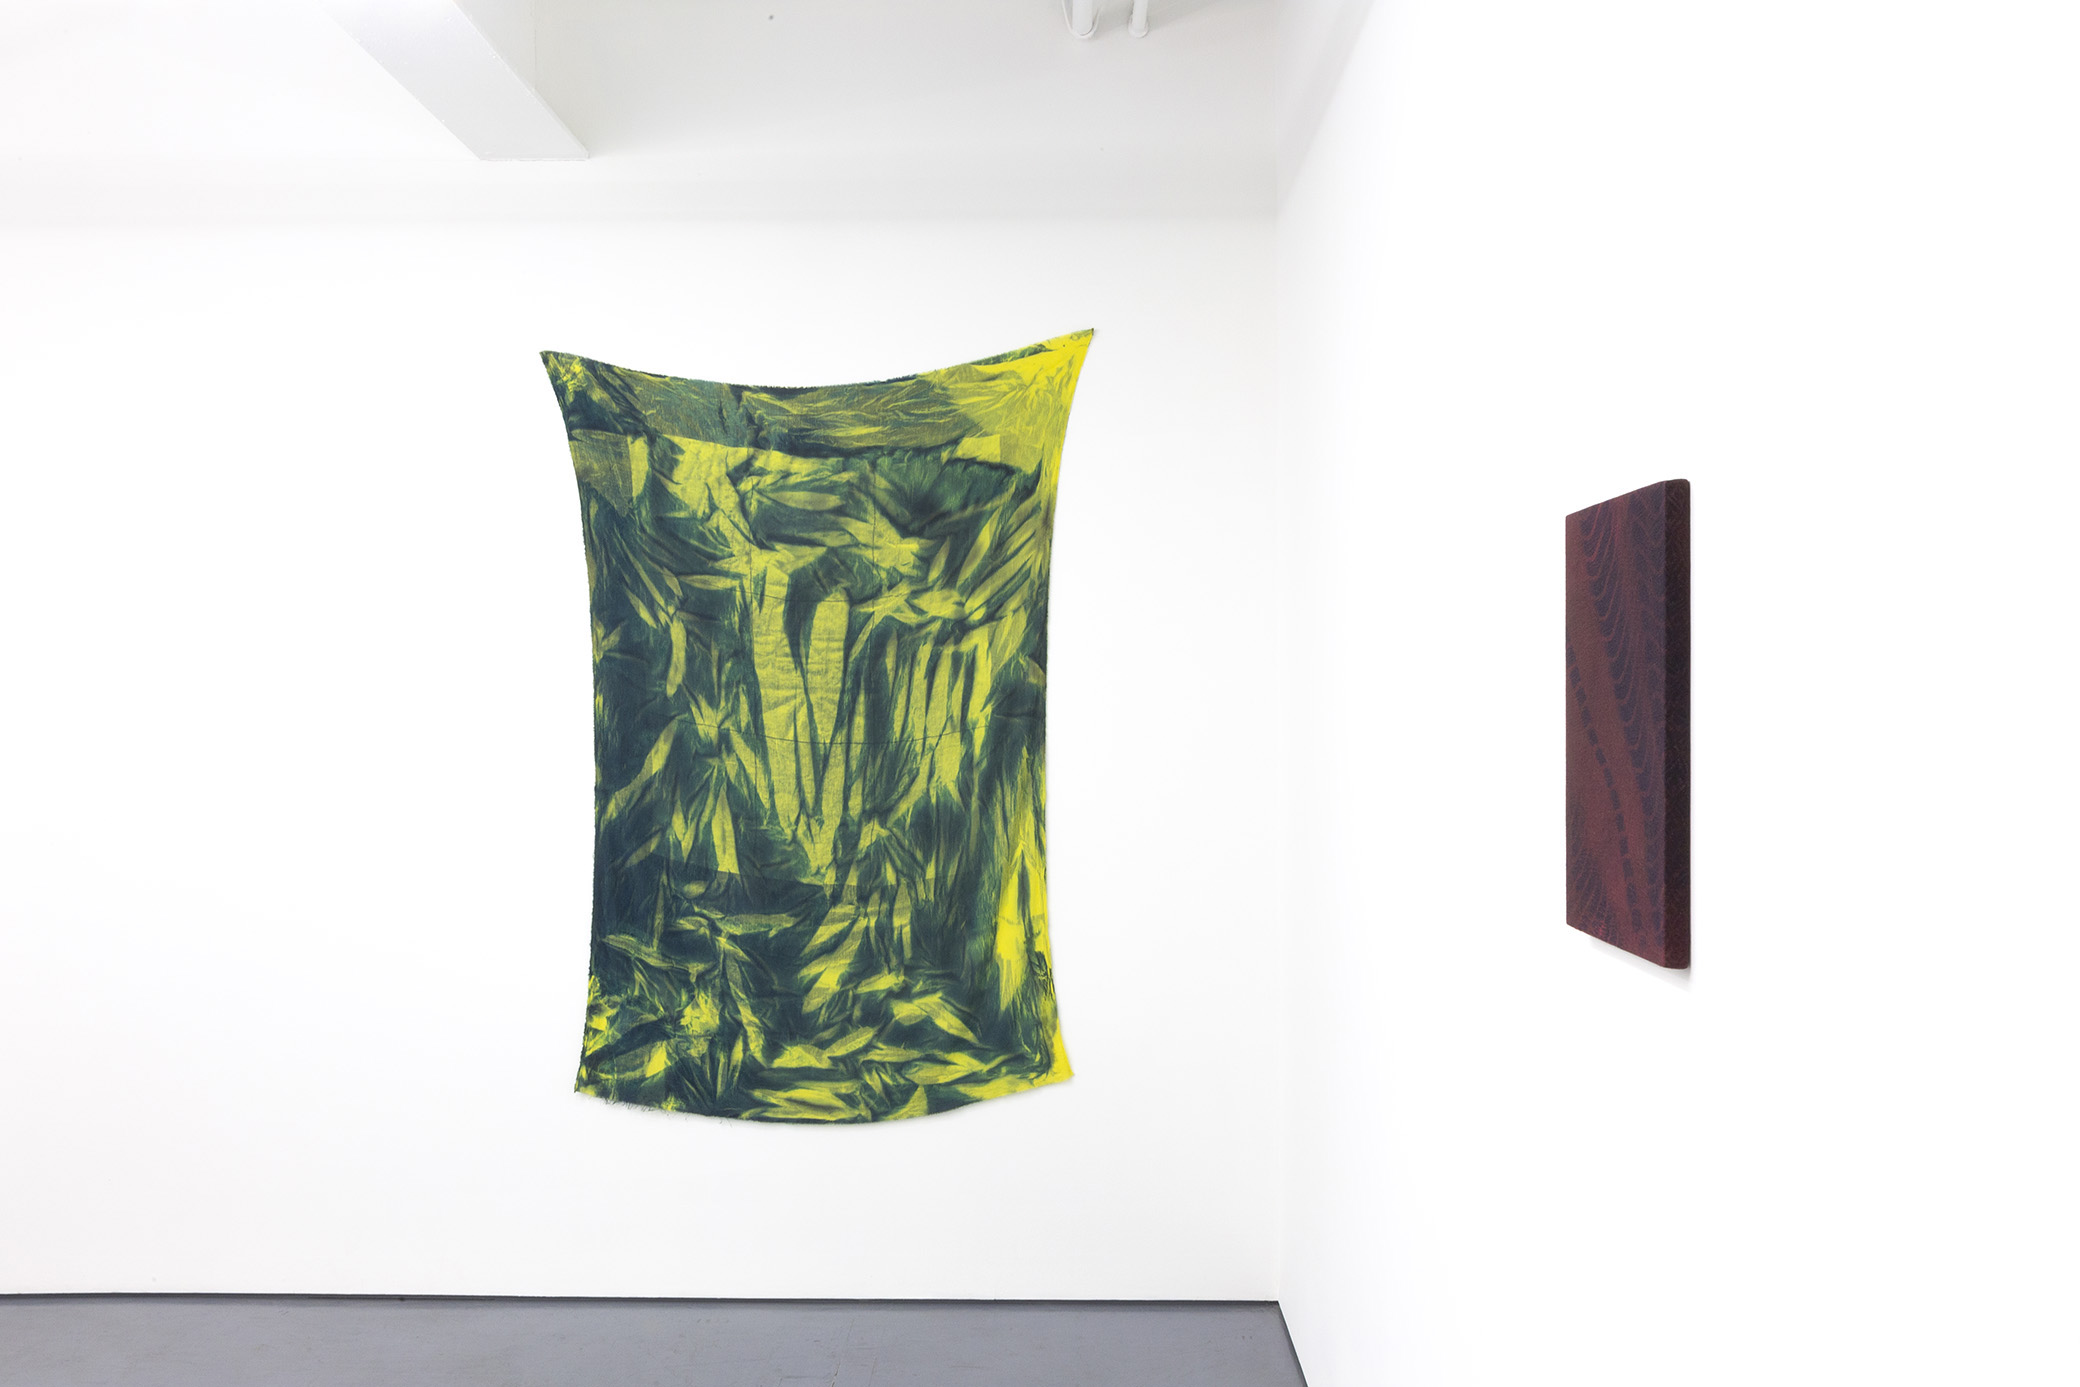  Installation view of the exhibition Egregore by Gregory Kaplowitz at Transmitter 